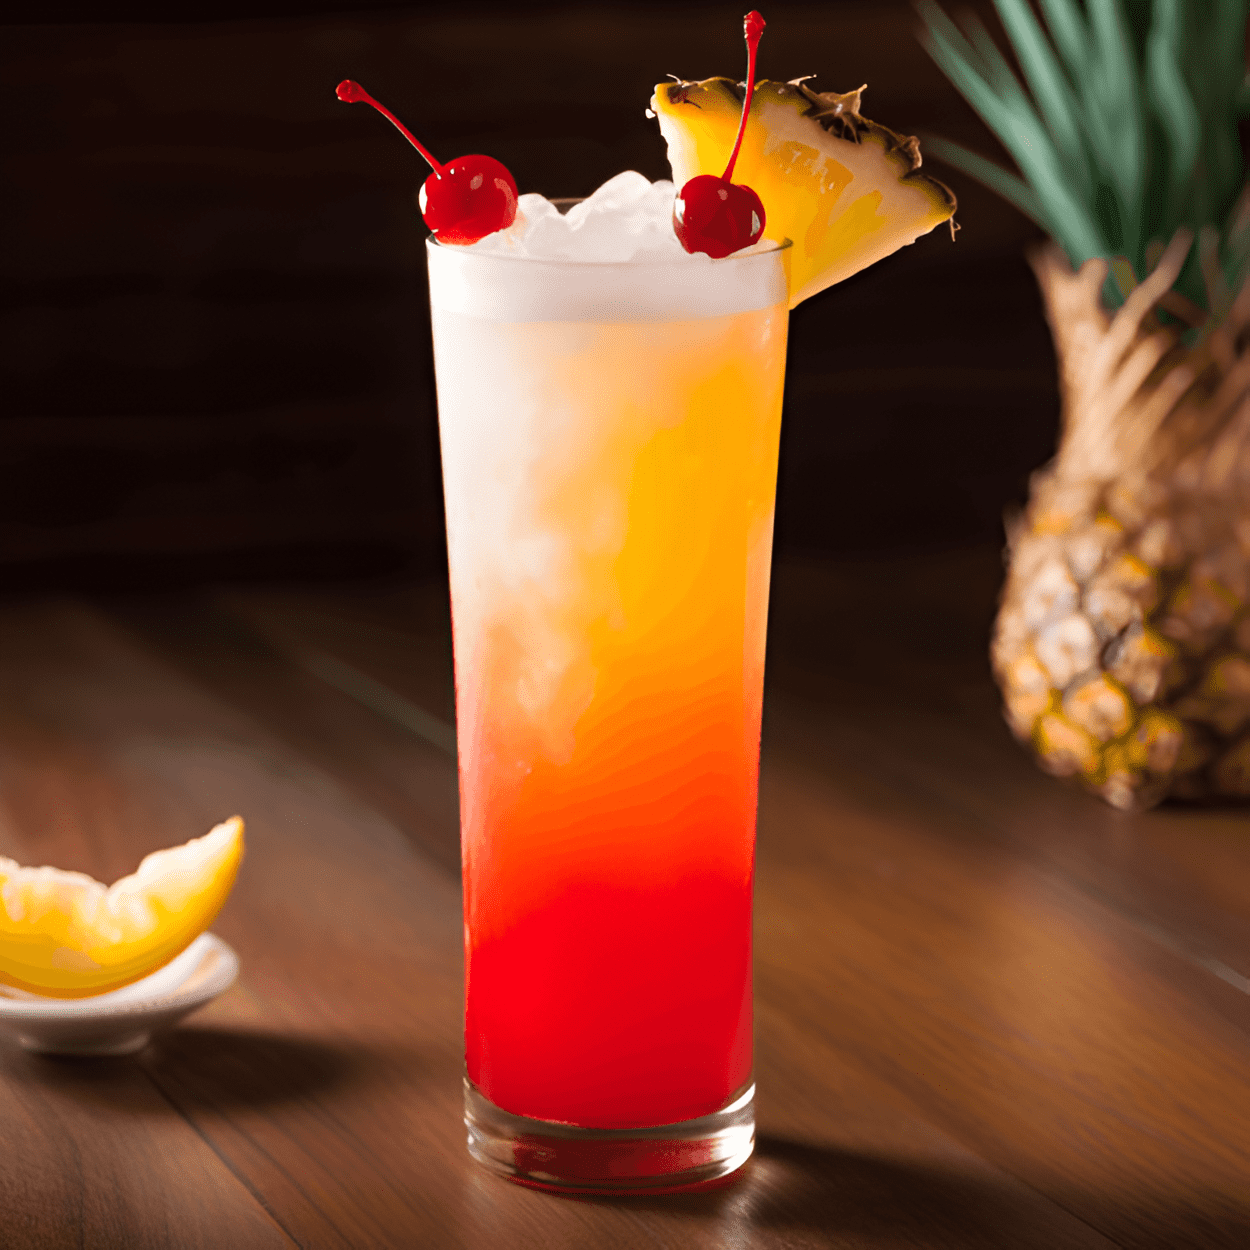 Lifesaver Cocktail Recipe - The Lifesaver cocktail is sweet, fruity, and refreshing. It has a tropical taste with a hint of coconut and pineapple, balanced by the tartness of the lime. The rum adds a warm, rich undertone that complements the sweetness of the other ingredients.